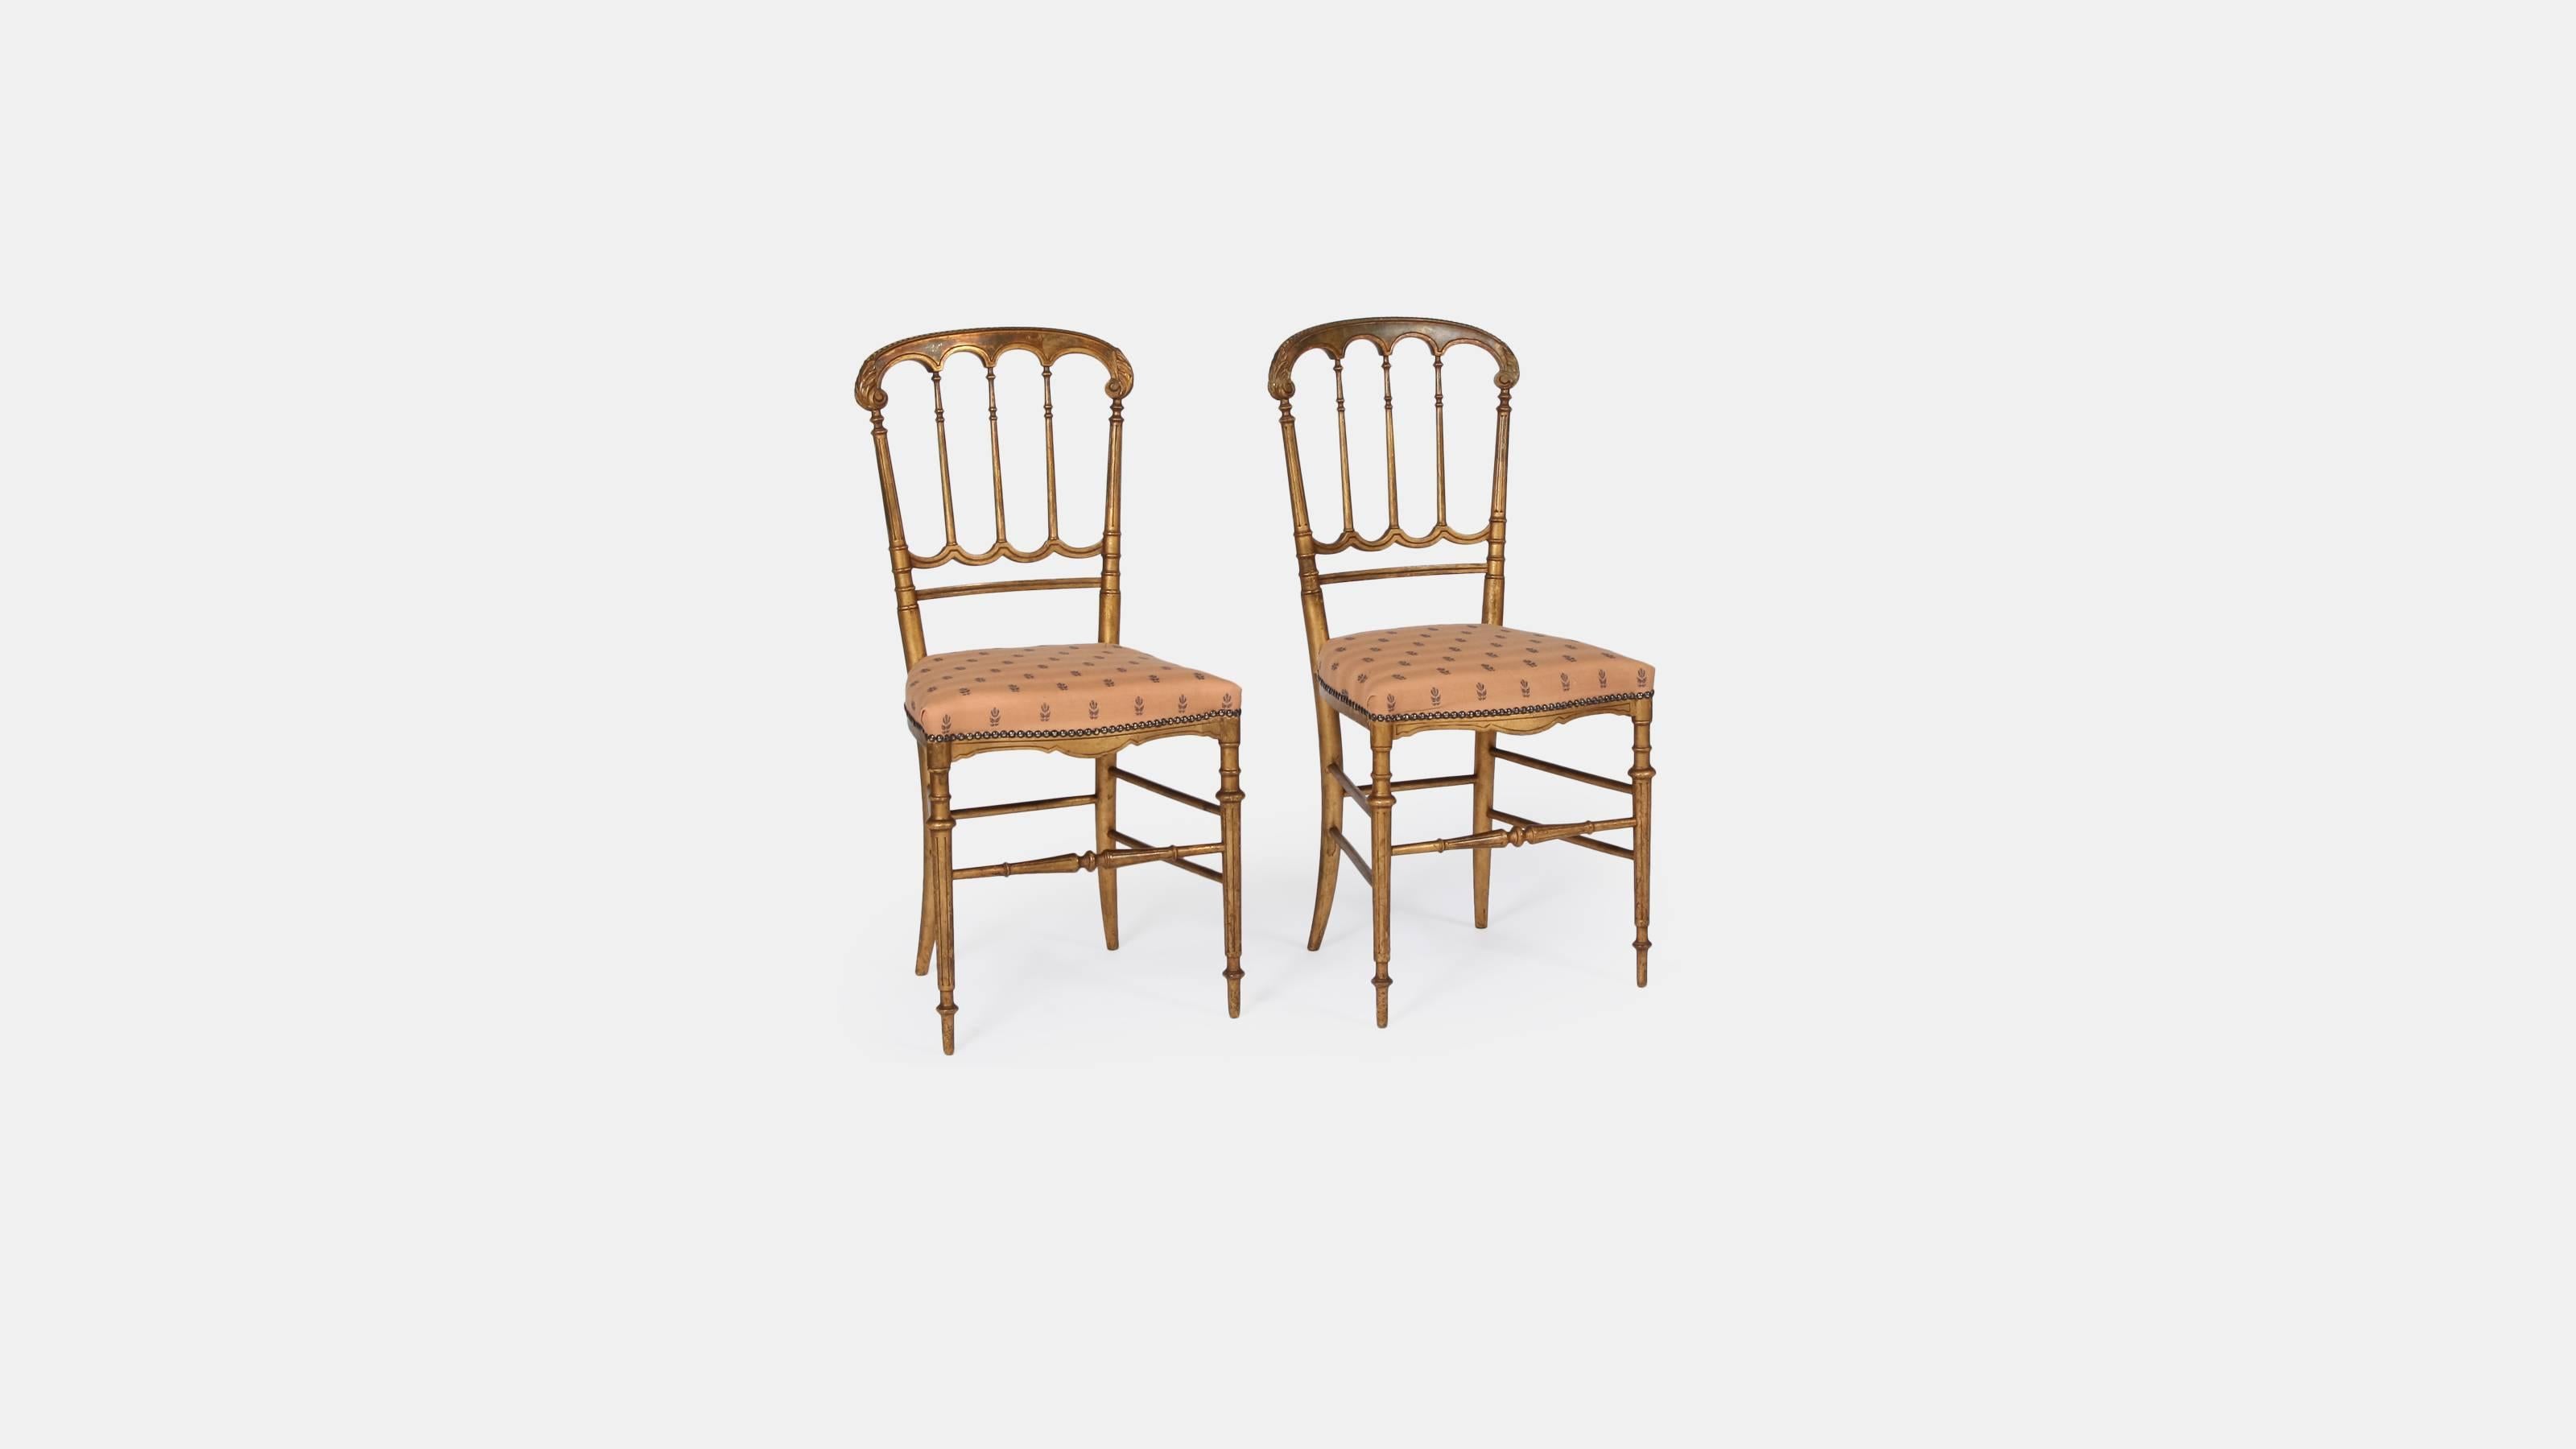 A pair of antique giltwood salon chairs, on slender tapering supports.

Each chair has beautifully aged gilding that has a fantastic patina look. The seat pads have been recovered with an antique embroidered cotton fabric.